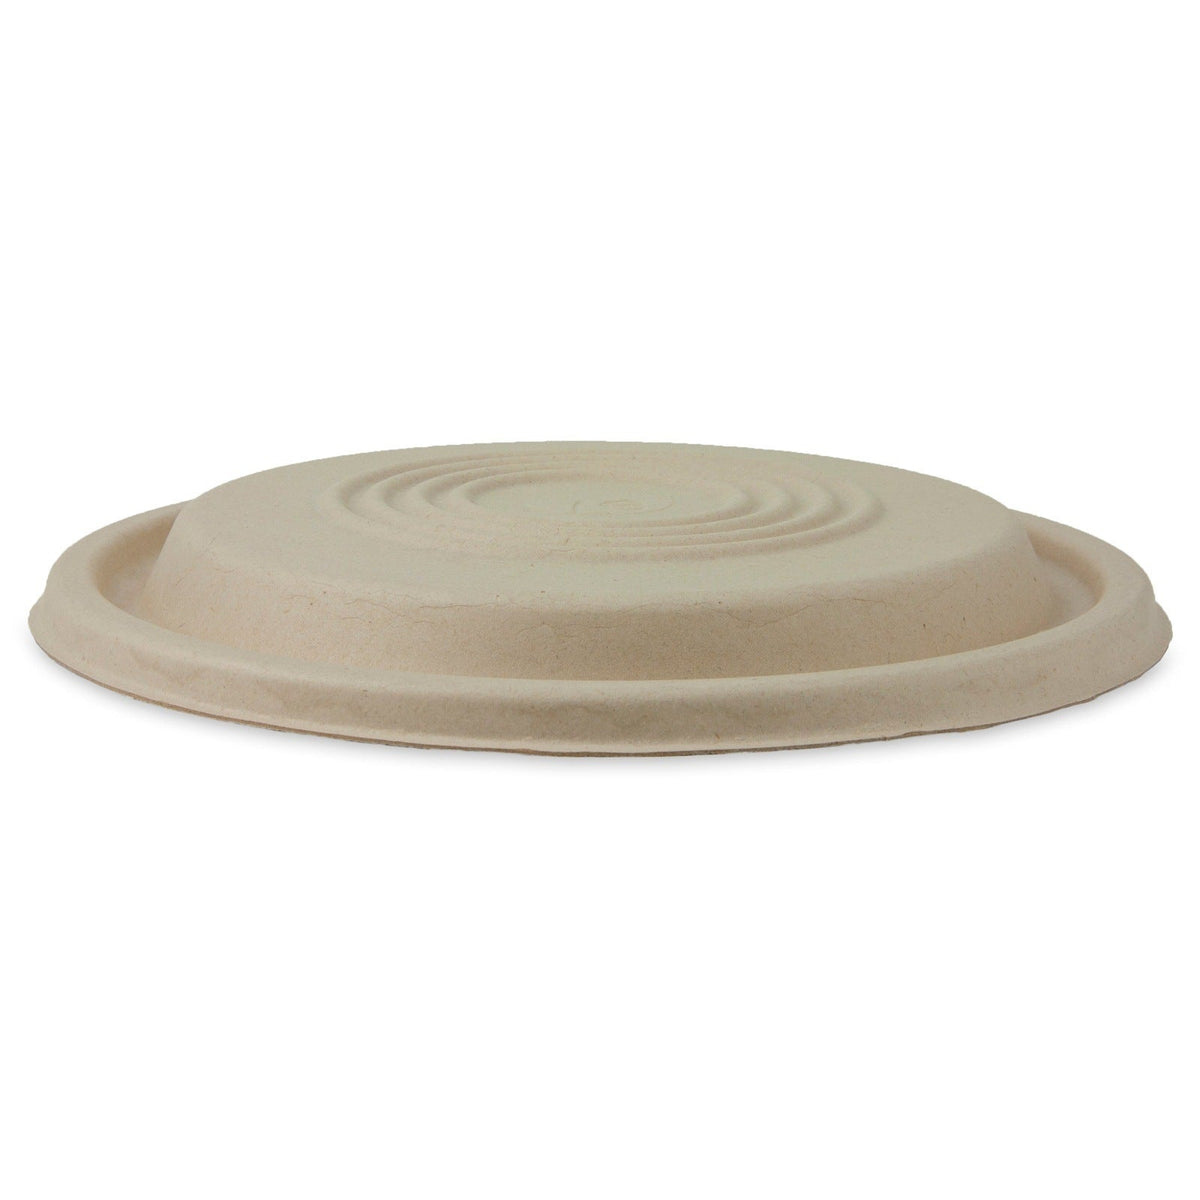 40-Ounce Fiber Entrée Bowl, 300-Count Case by TheLotusGroup - Good For The Earth, Good For Us